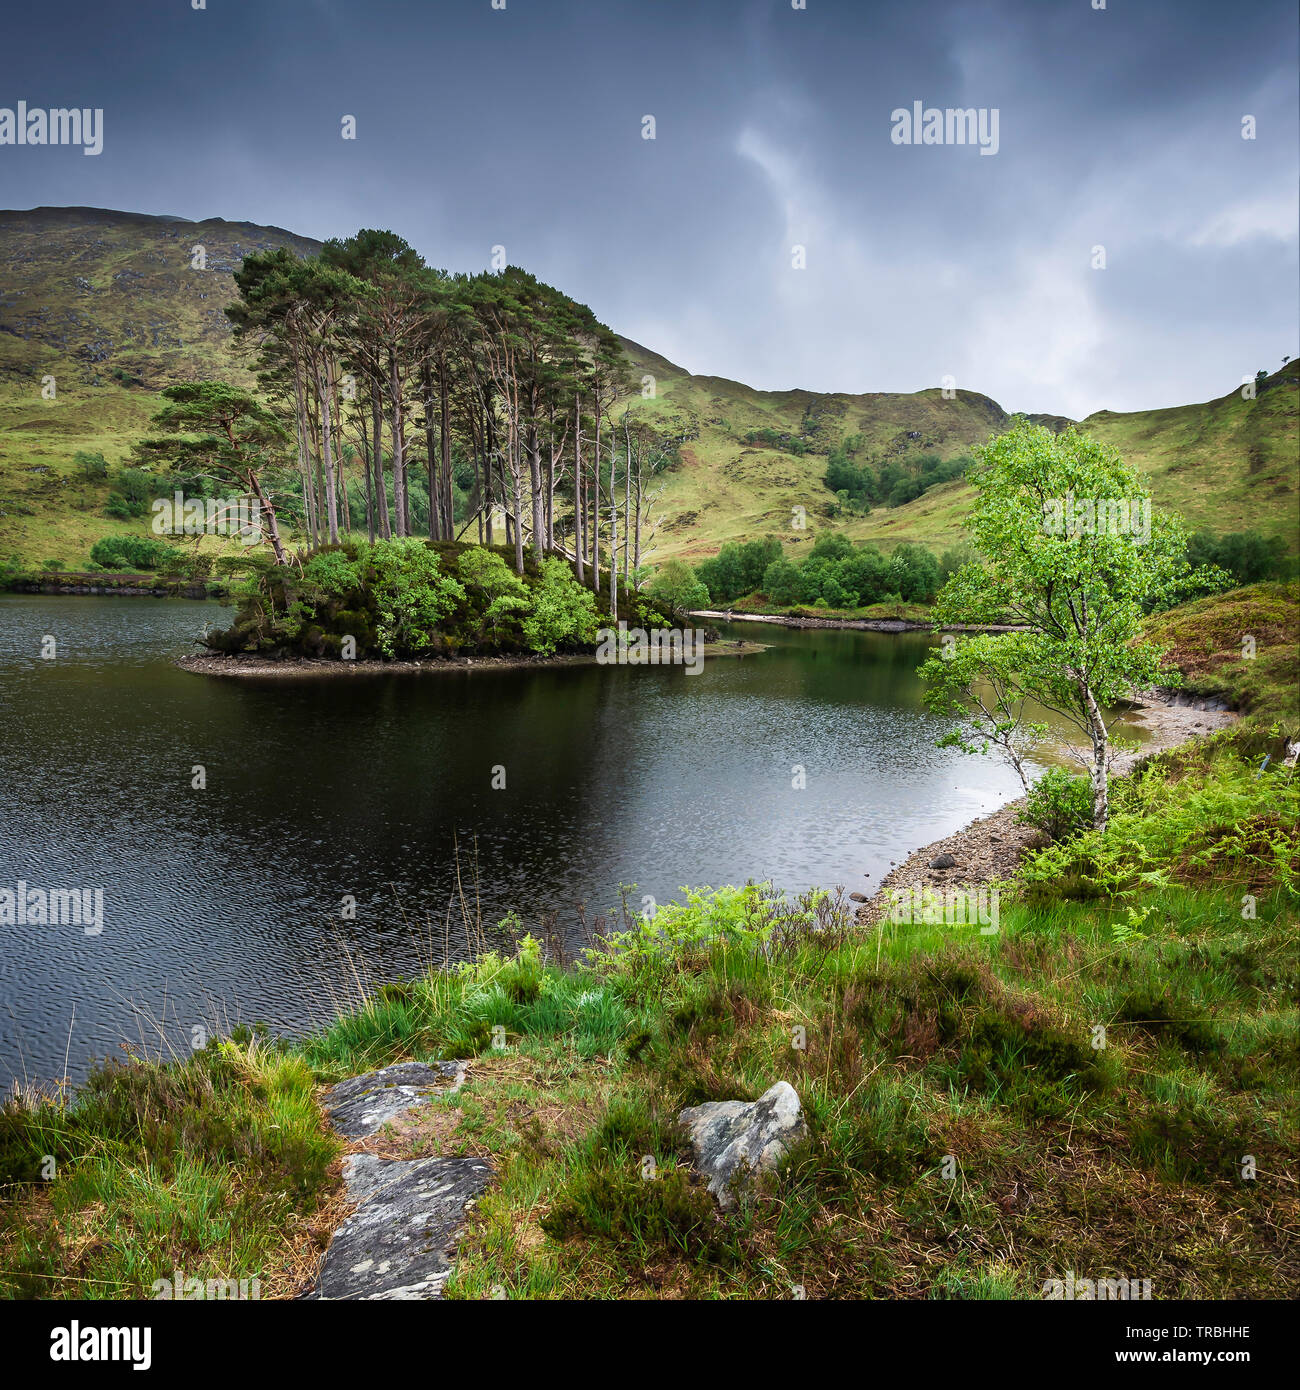 Scenic landscape of Scotland,UK.Pine trees growing on small island on the middle of lake, moody sky above green hills and rock on lakeshore.Nature UK. Stock Photo